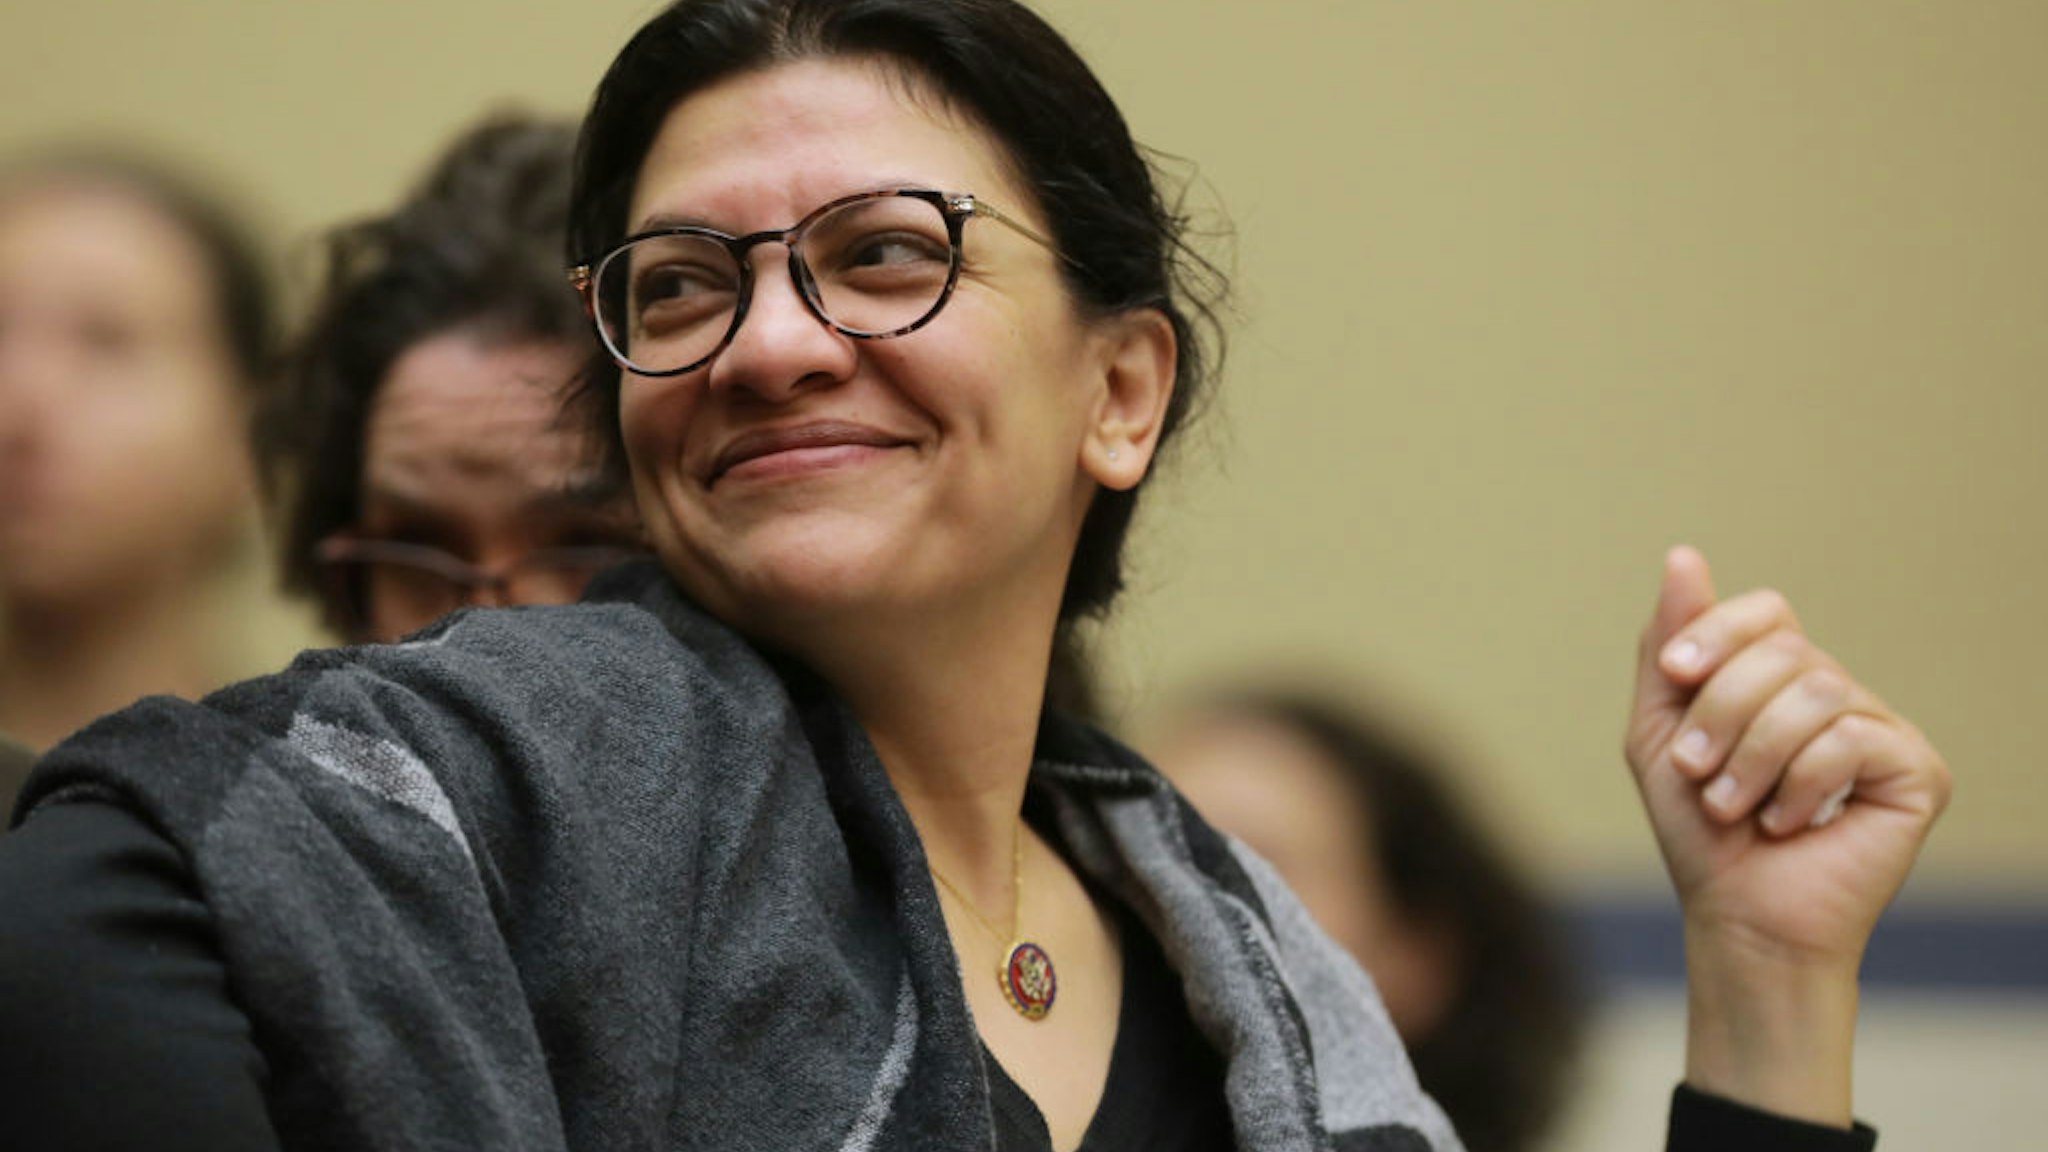 House Oversight and Reform Committee member Rep. Rashida Tlaib (D-MI) attends a hearing about the 2020 census in the Rayburn House Office Building on Capitol Hill January 09, 2020 in Washington, DC.